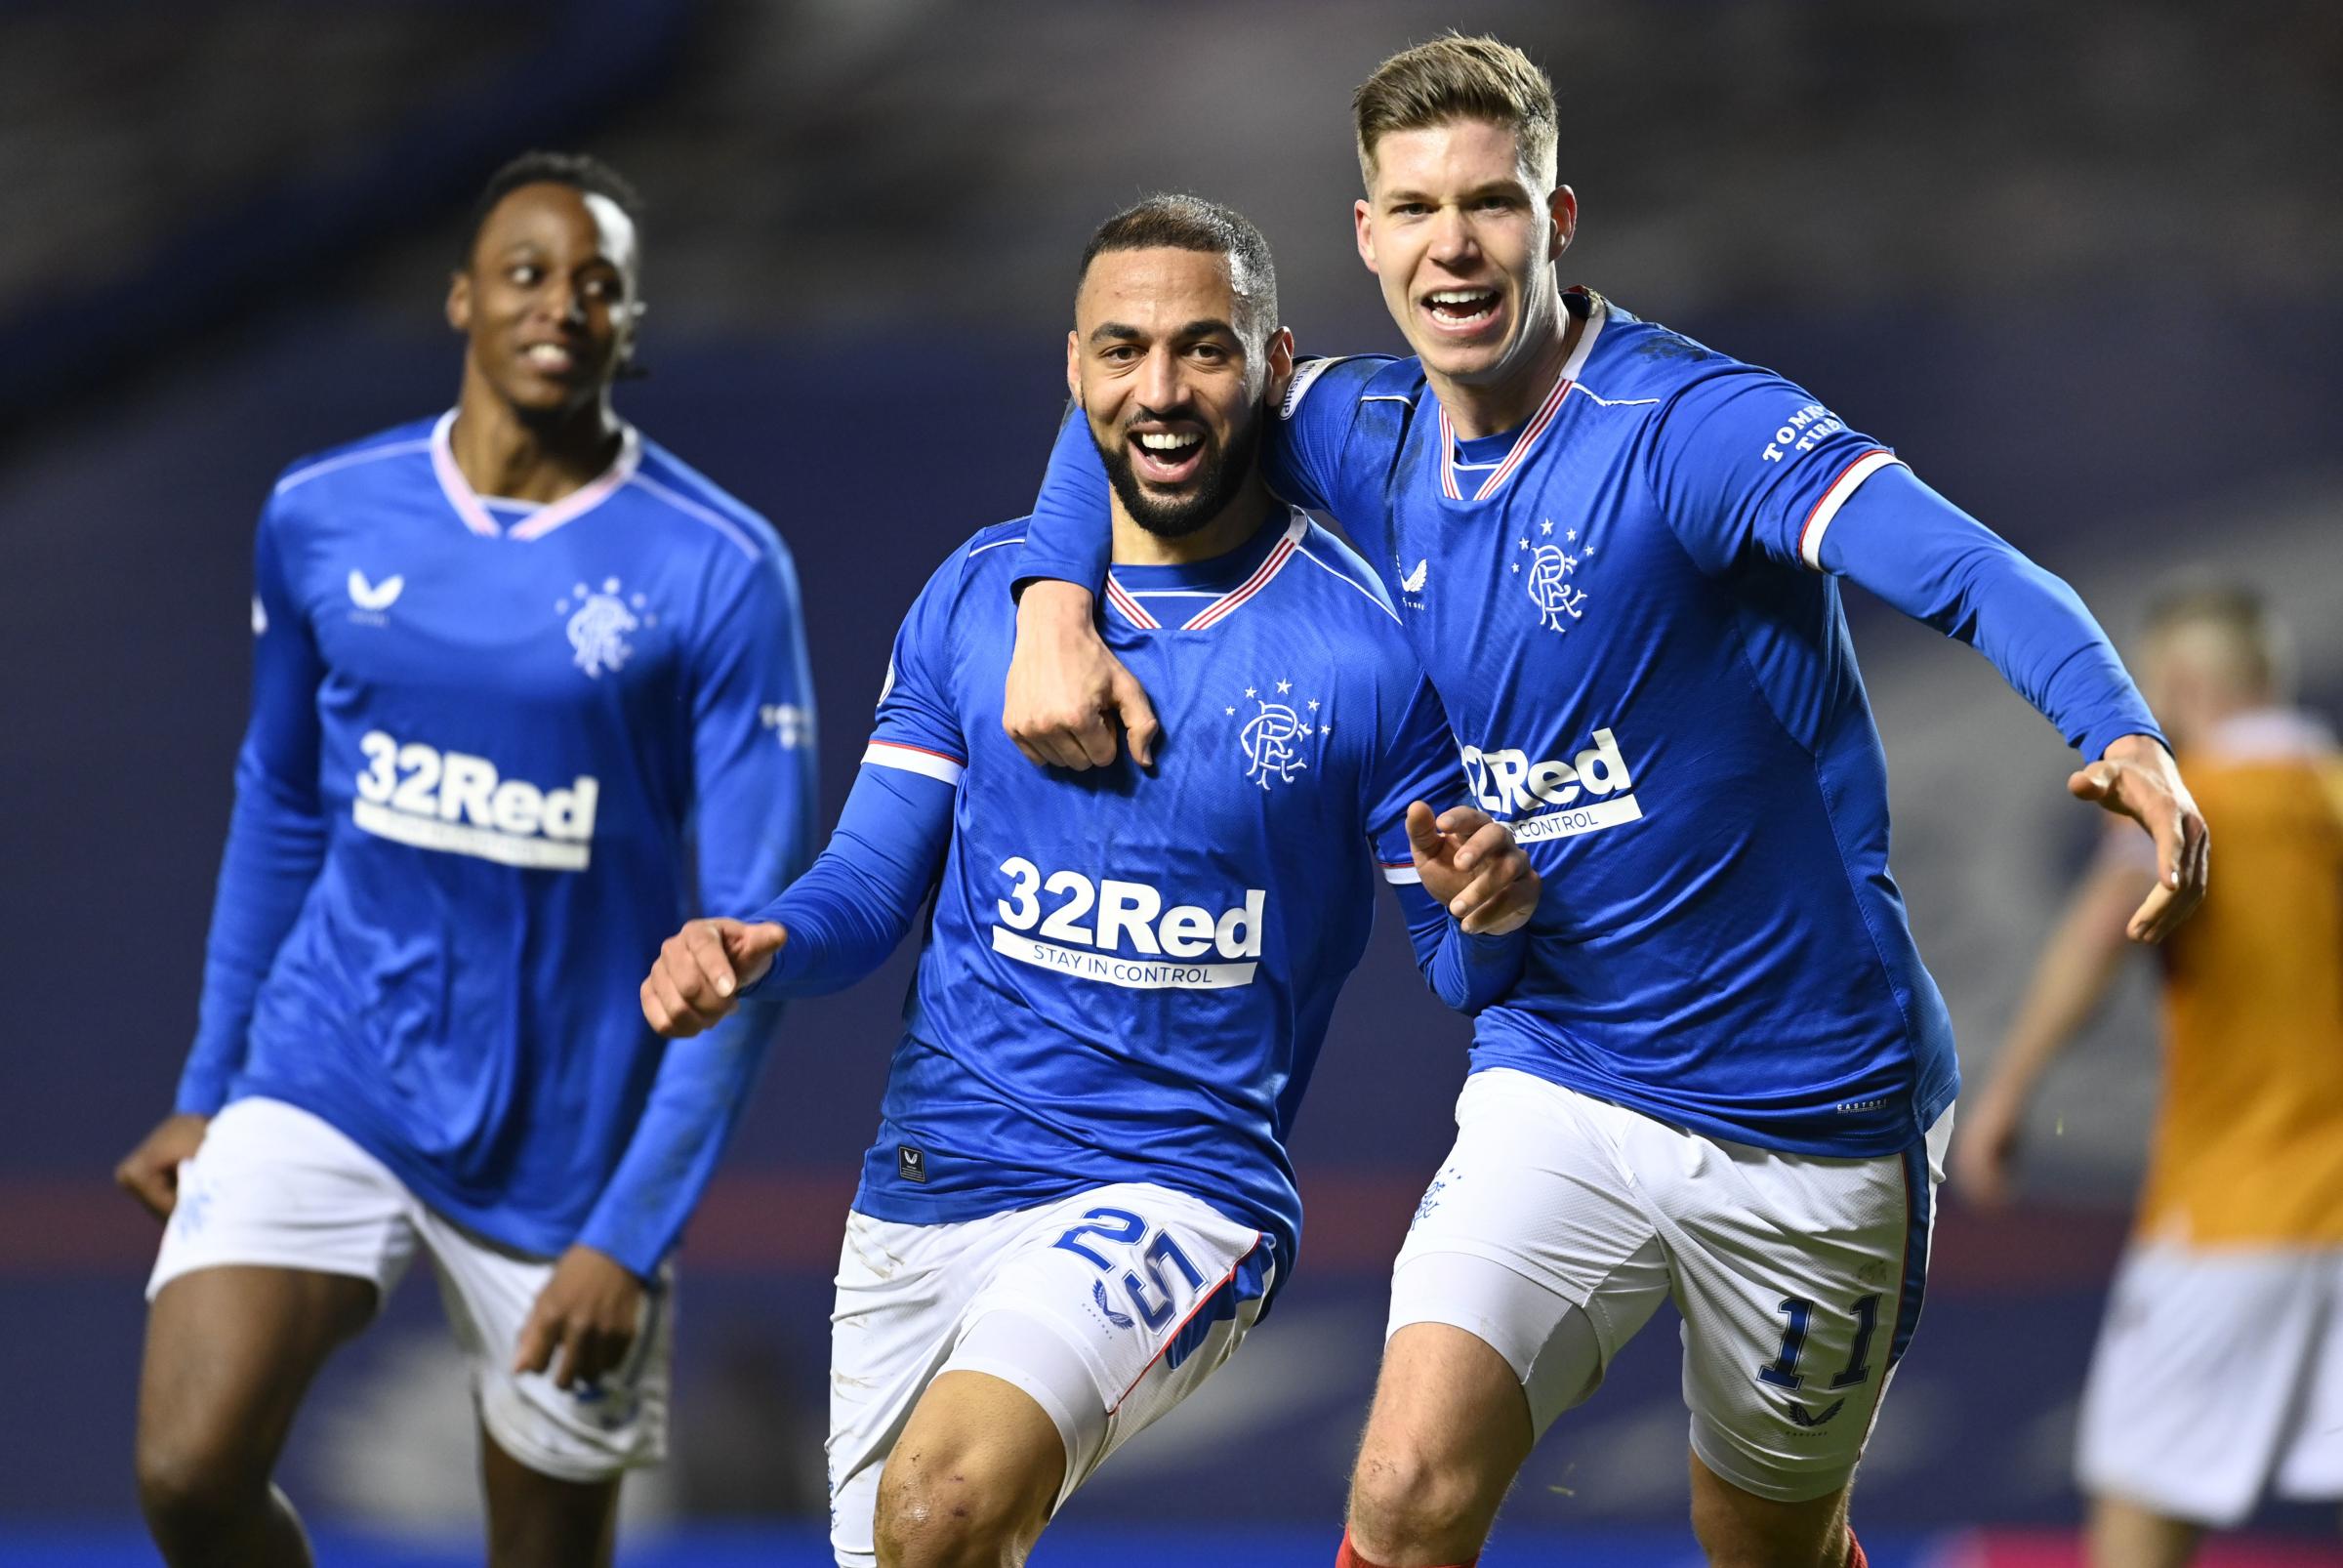 Kemar Roofe celebrates with Cedric Itten after scoring to make it 3-1 during a Scottish Premiership match between Rangers and Motherwell